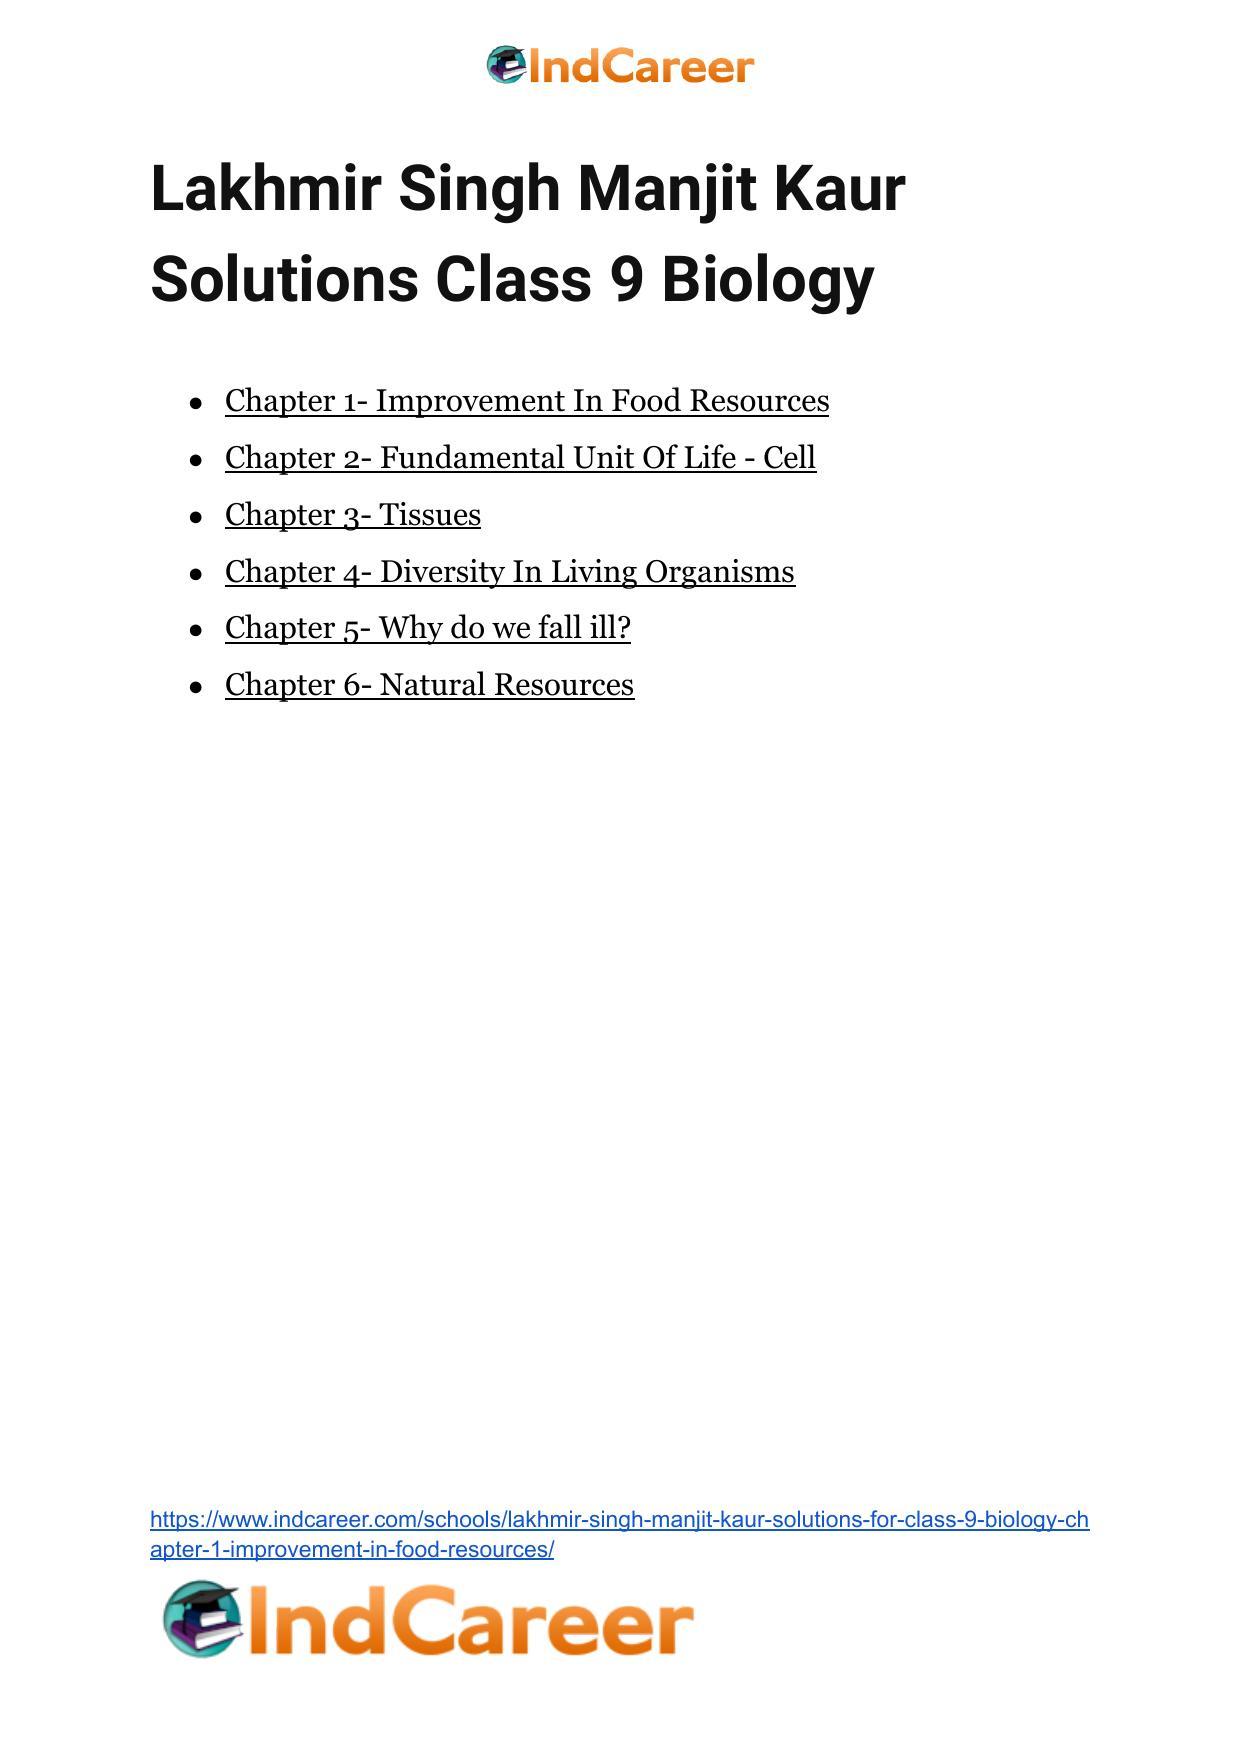 Lakhmir Singh Manjit Kaur  Solutions for Class 9 Biology: Chapter 1- Improvement In Food Resources - Page 9